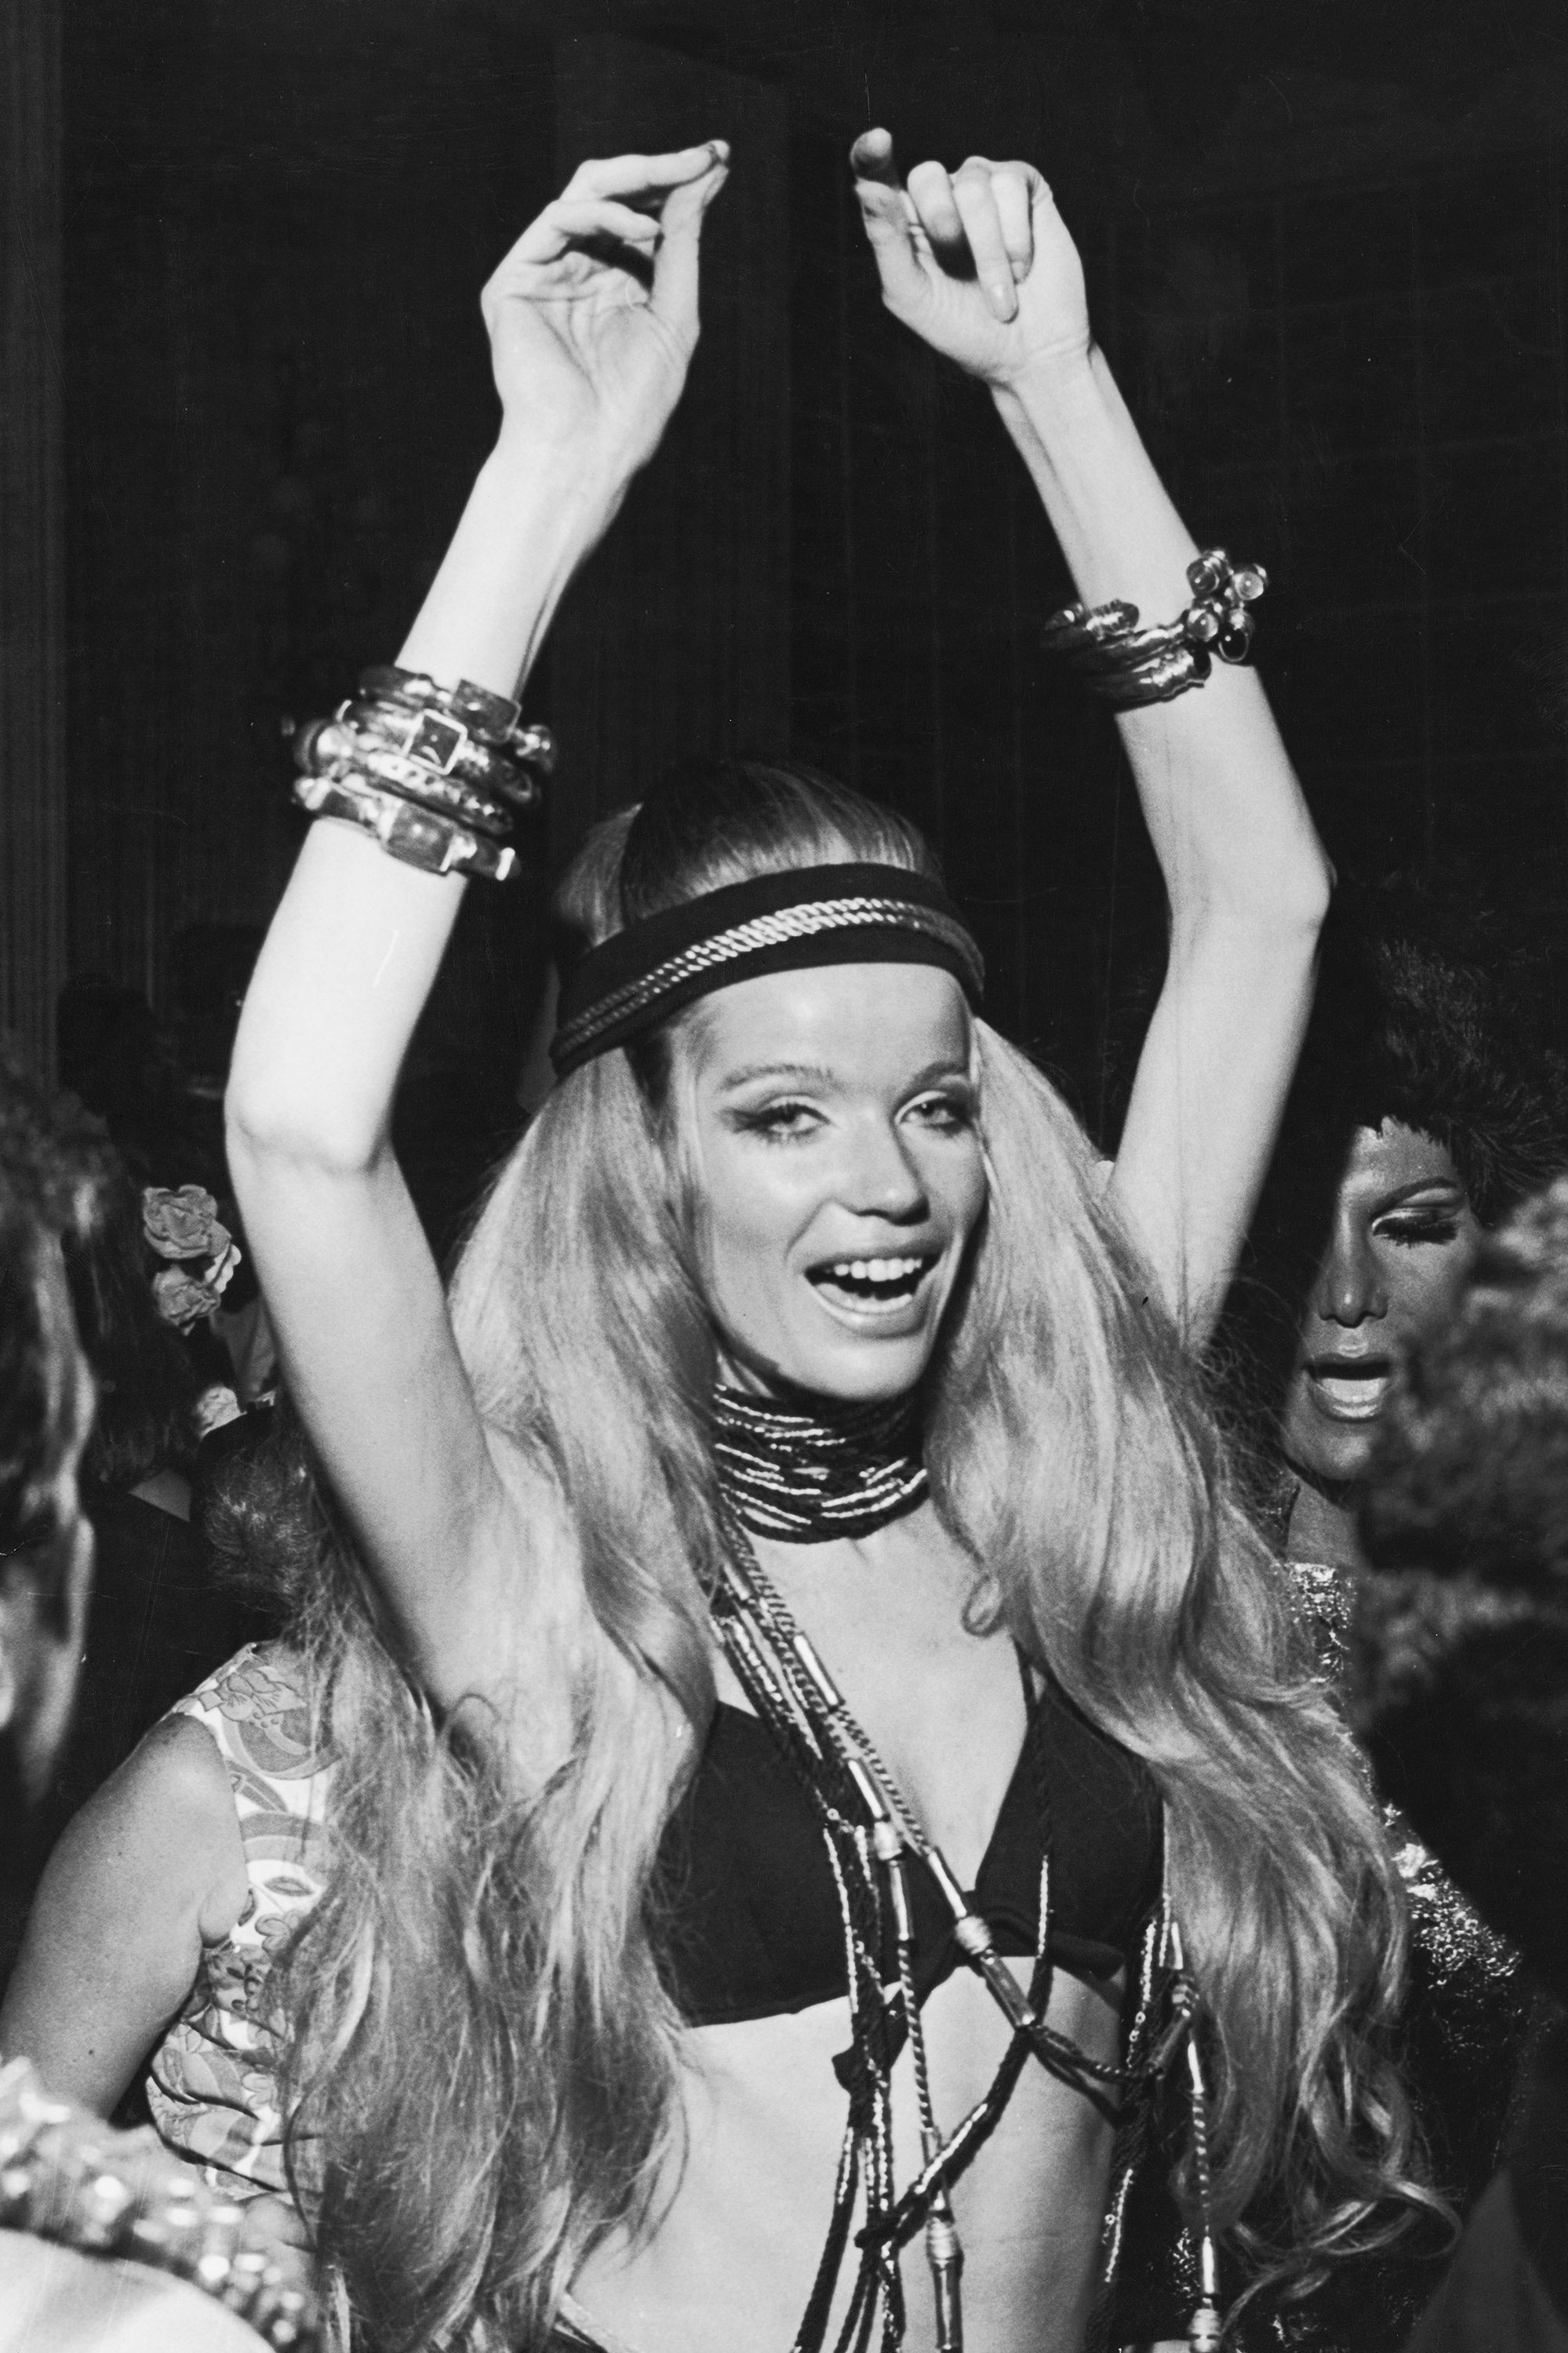 German countess and fashion model Veruschka raises her arms above her head as she dances at a party during Carnaval Rio...